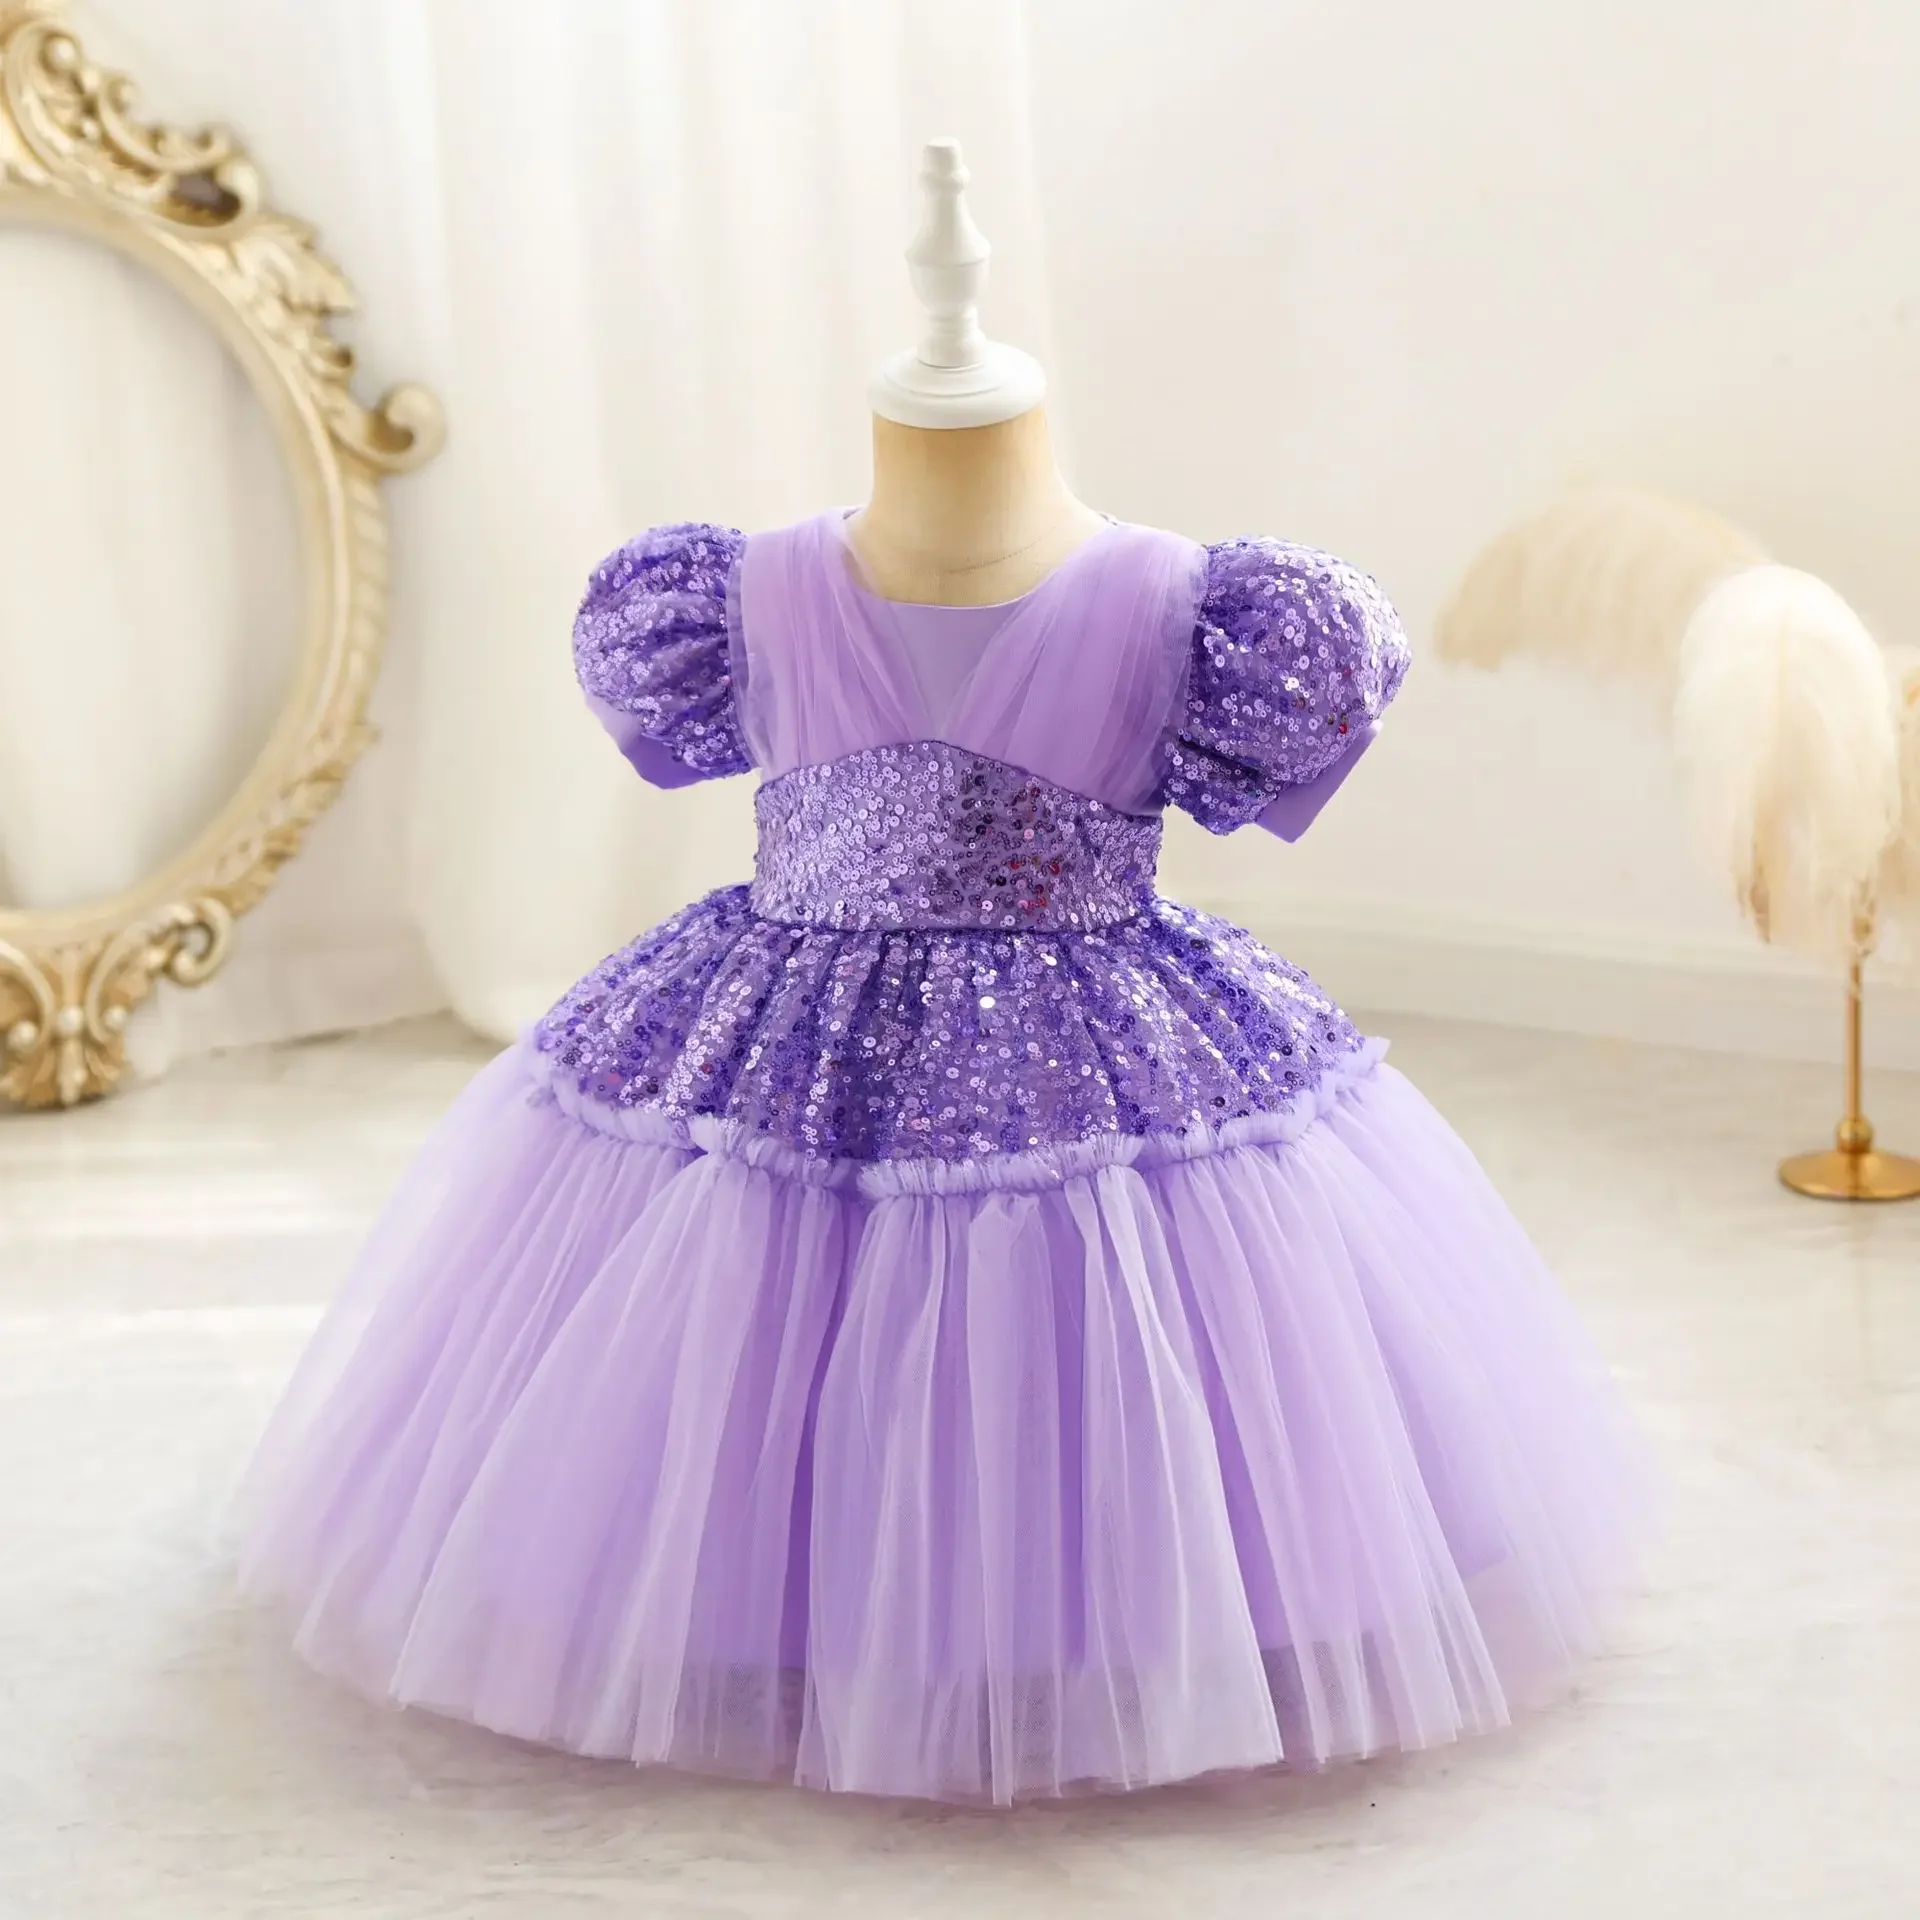 

New Girl Kid's Princess Dress Sequined Tulle Graduation Formal Party Frocks For Baby Children's Wedding Ball Gowns 6M-4 Years